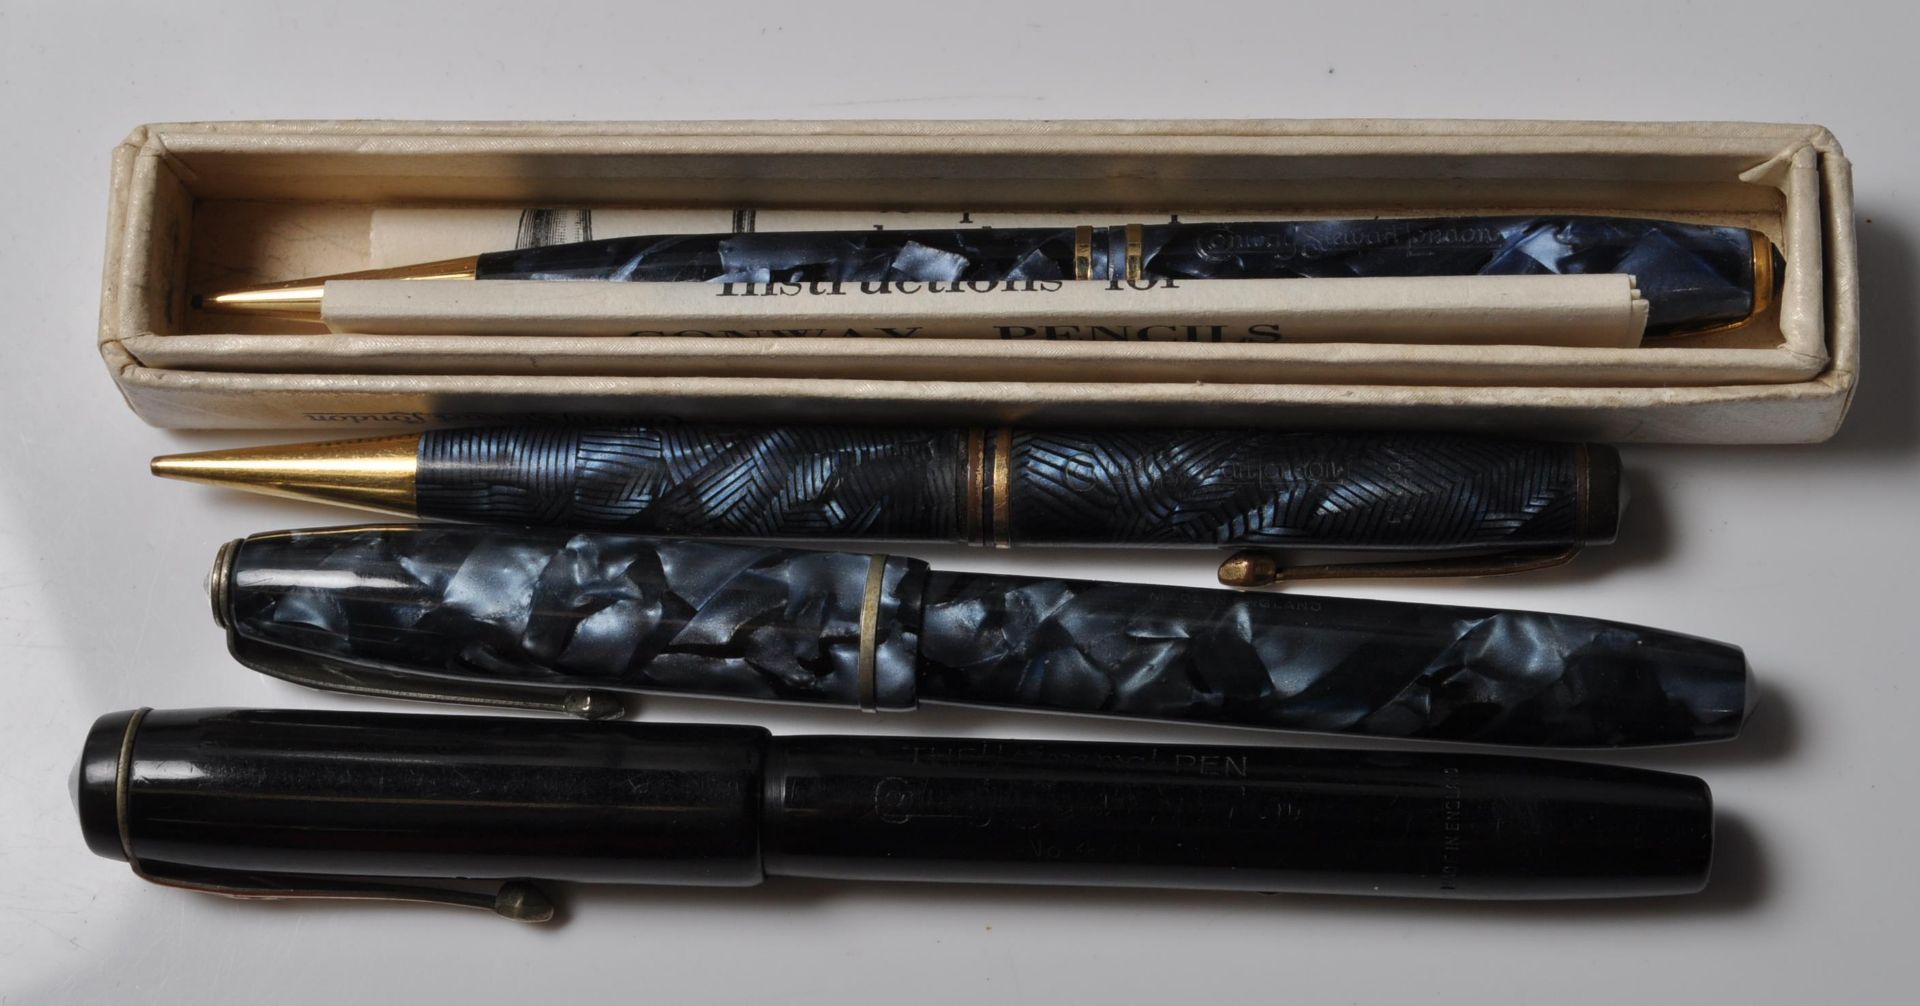 FOUR VINTAGE CONWAY FOUNTAIN PENS AND PENCILS